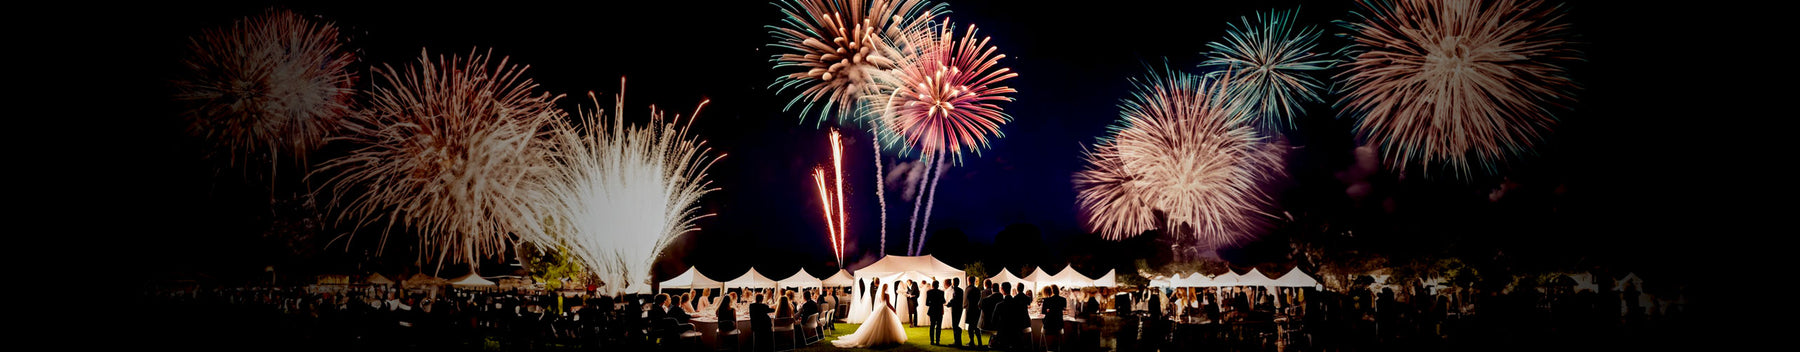 Unique Ways to Incorporate Fireworks into Wedding Celebrations